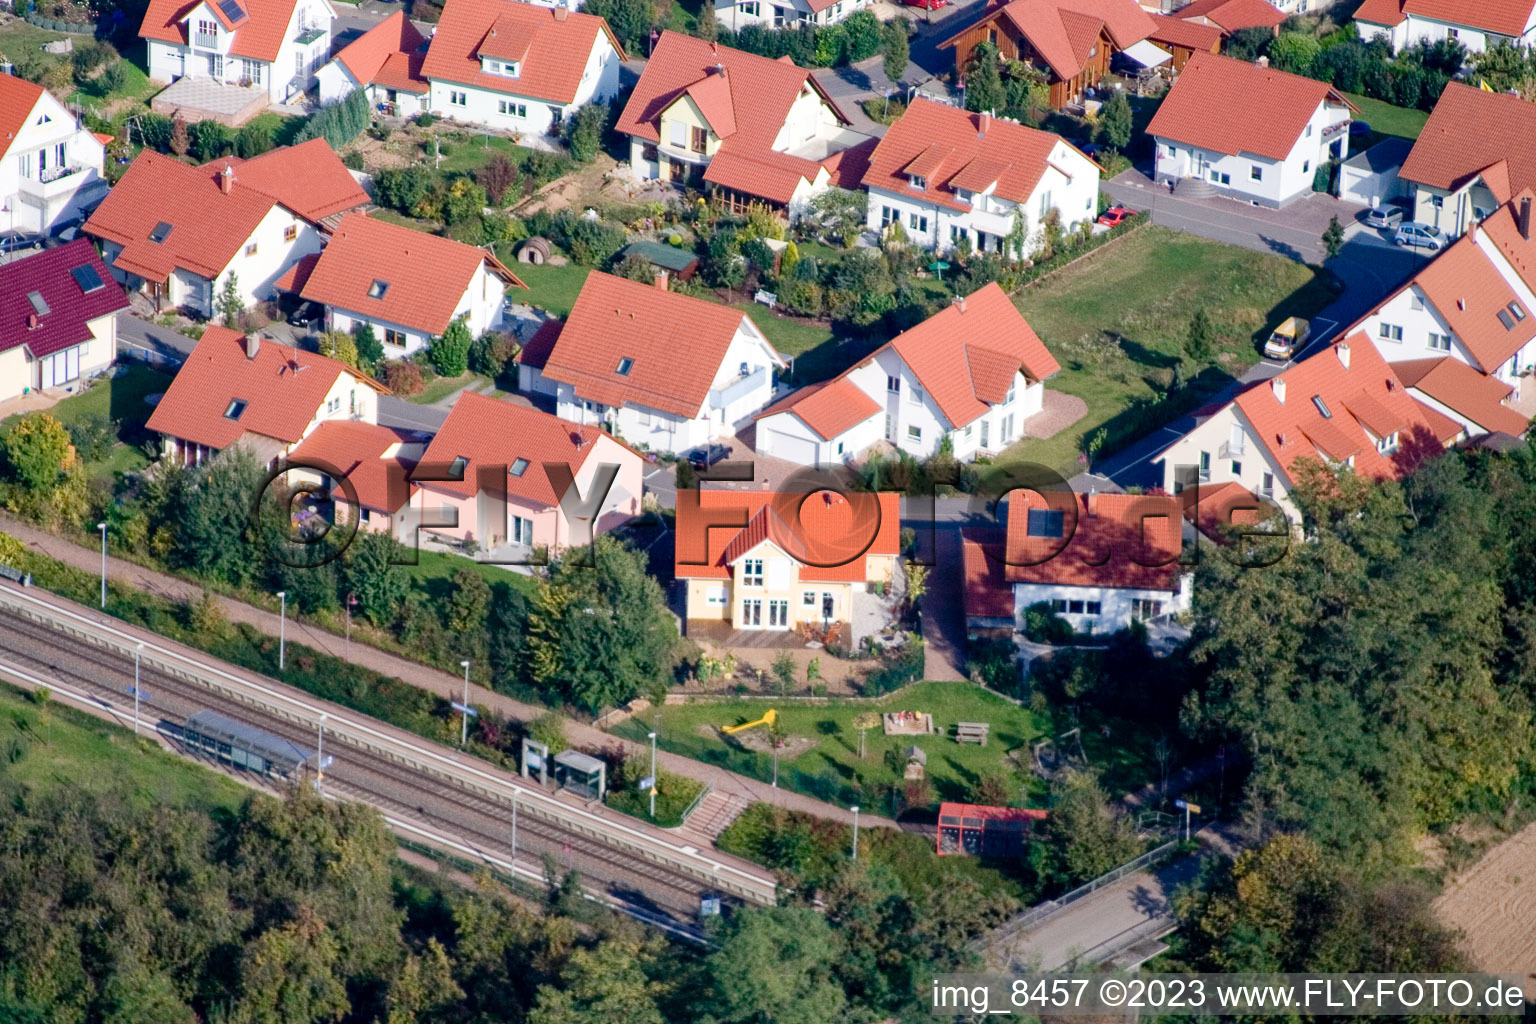 Aerial view of On the train in Steinweiler in the state Rhineland-Palatinate, Germany